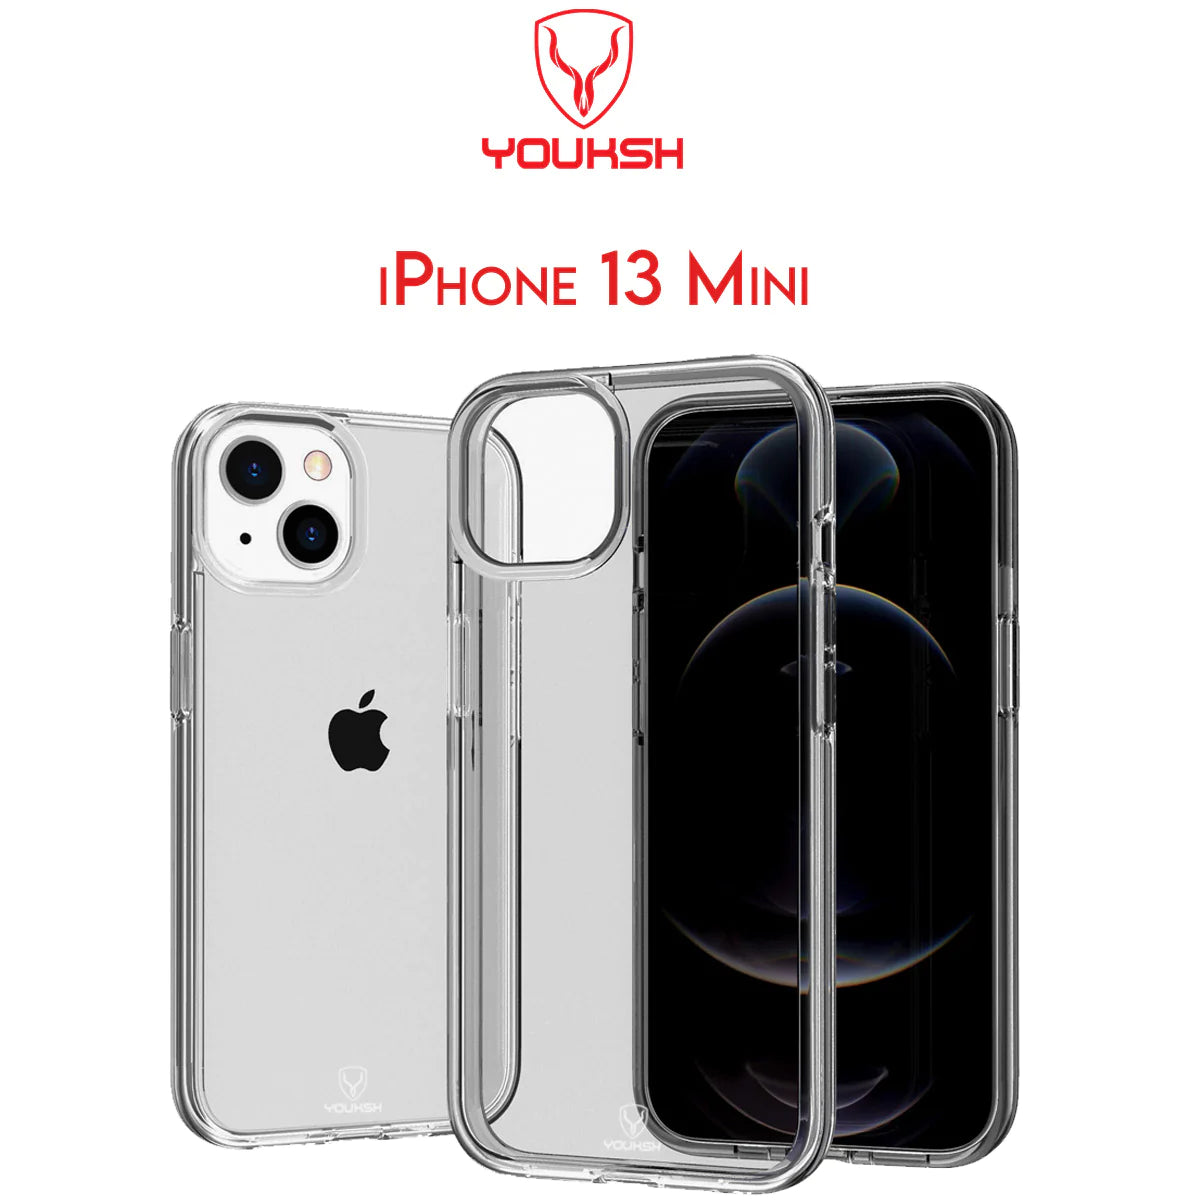 YOUKSH Apple iPhone 13 Mini Transparent Case | Soft Shock Proof Jelly Cover